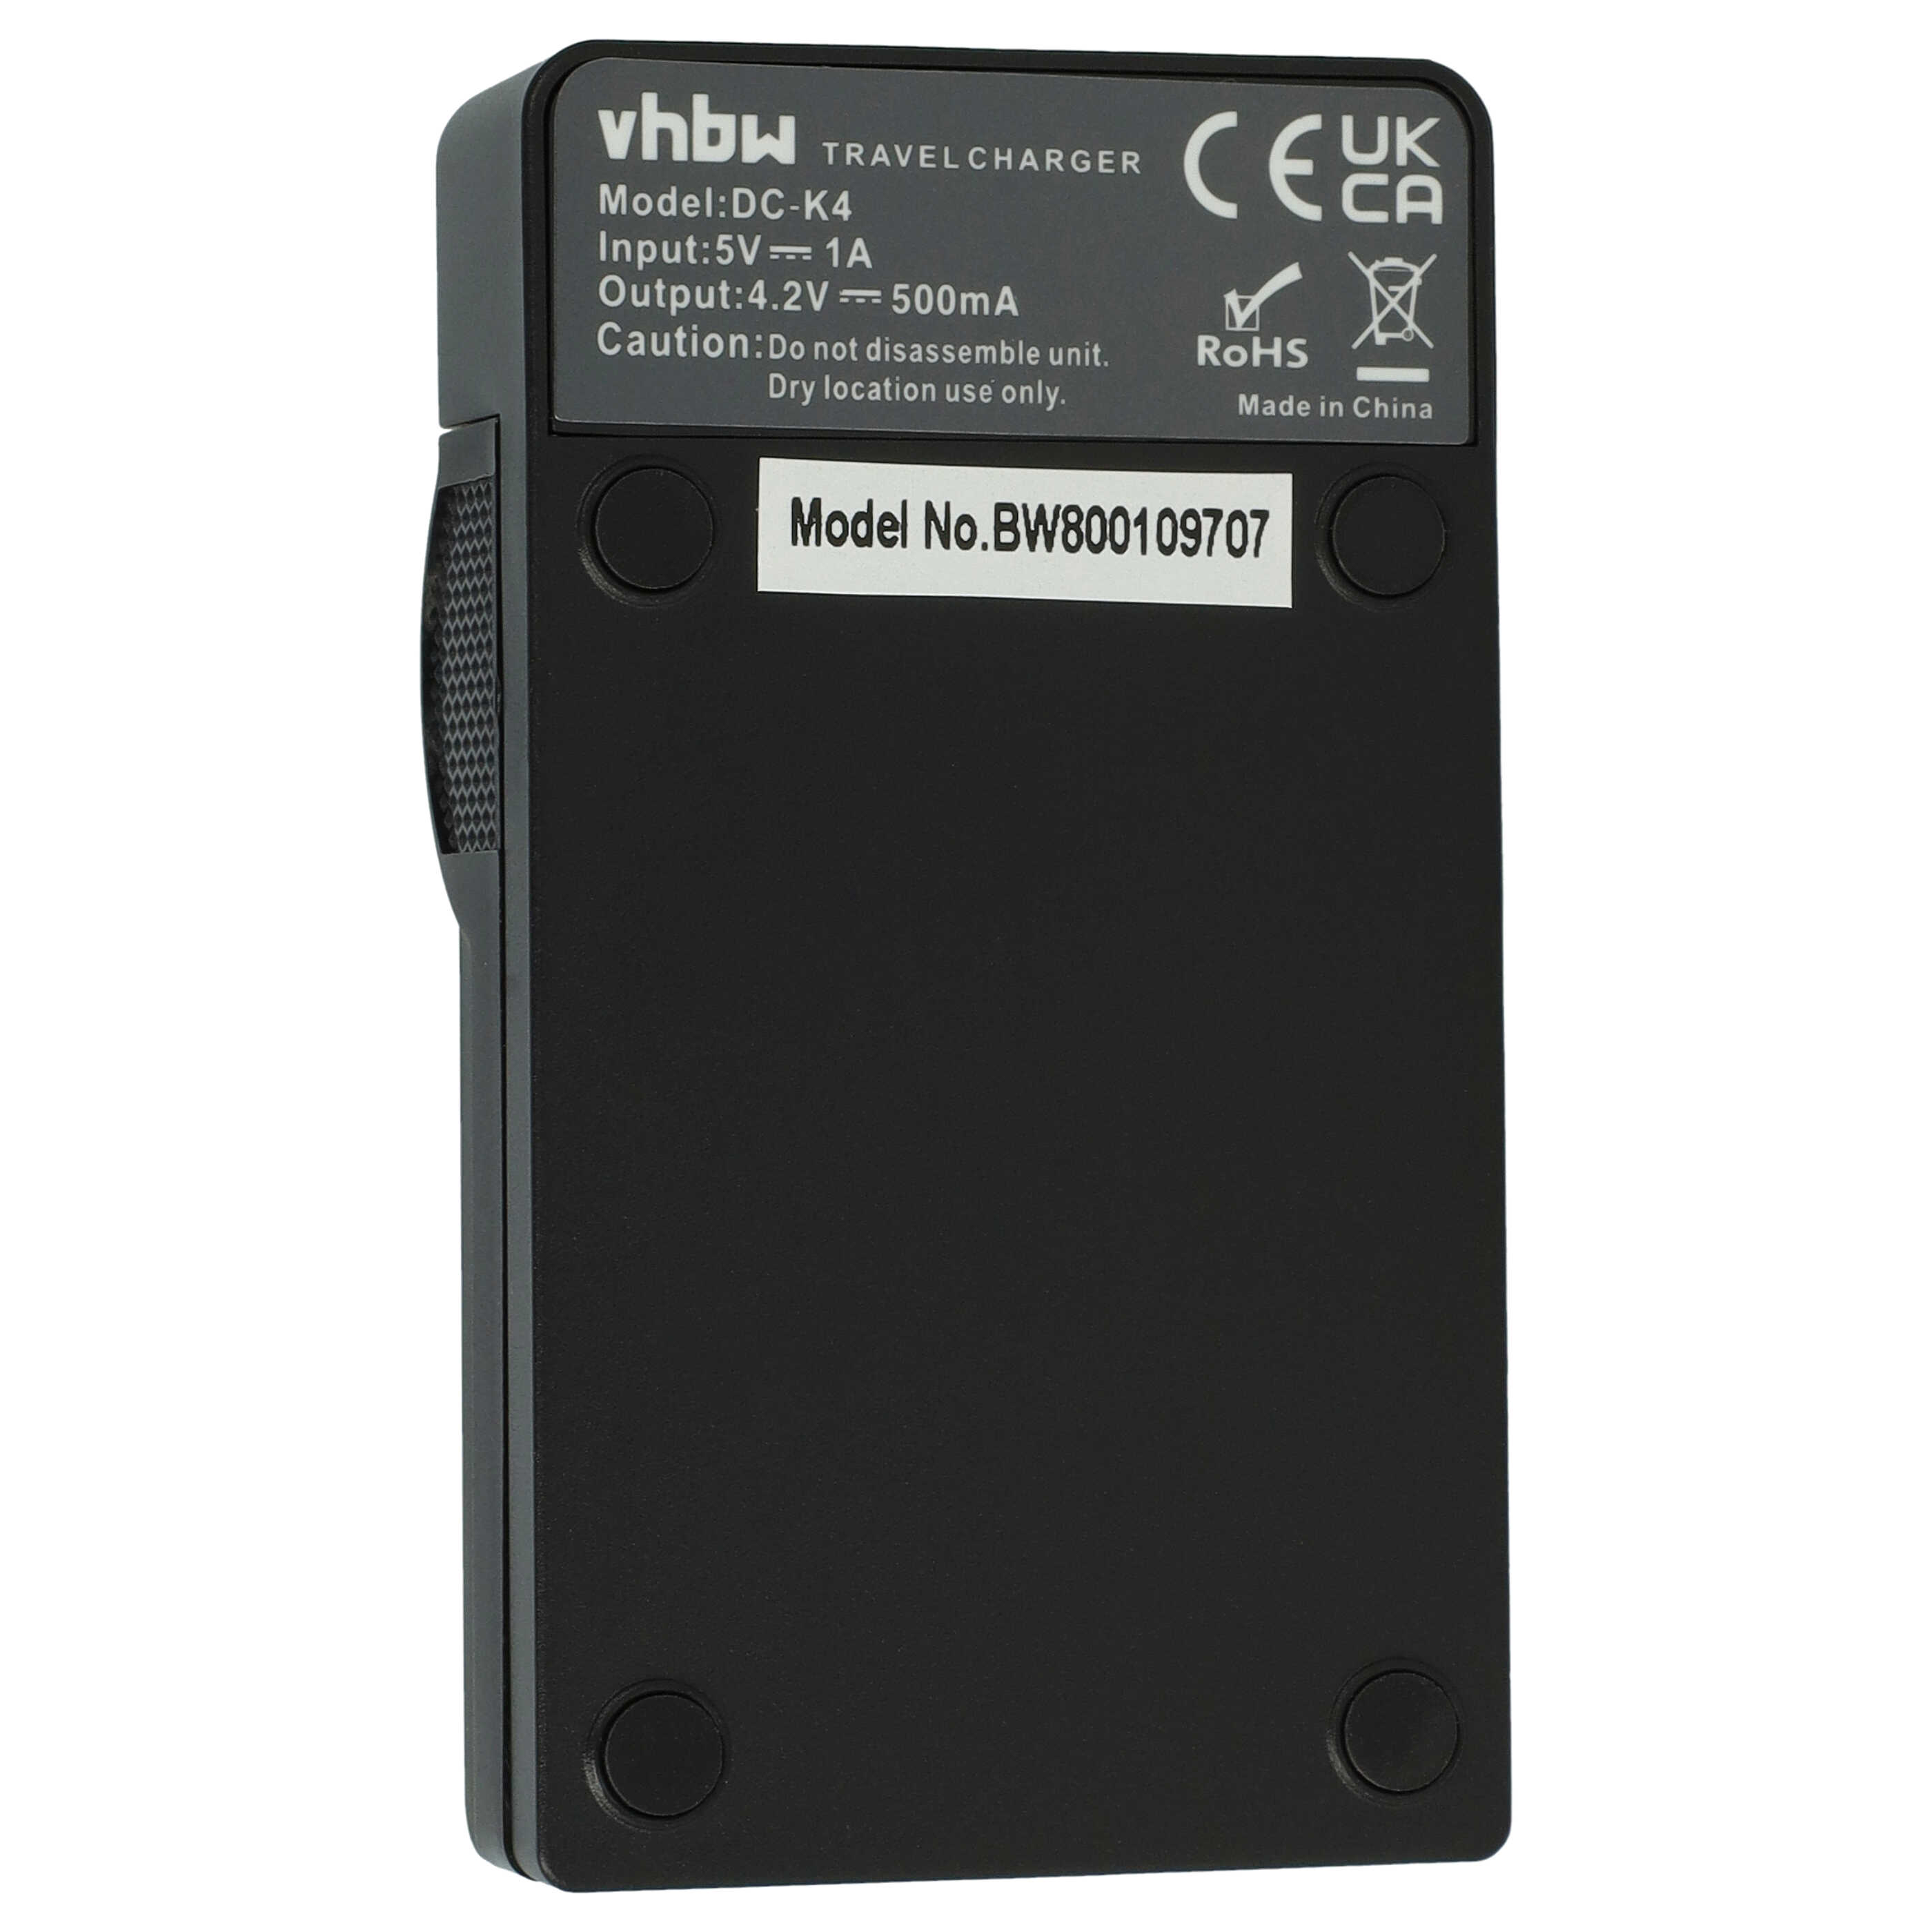 Battery Charger suitable for Sony NP-BG1 Camera etc. - 0.5 A